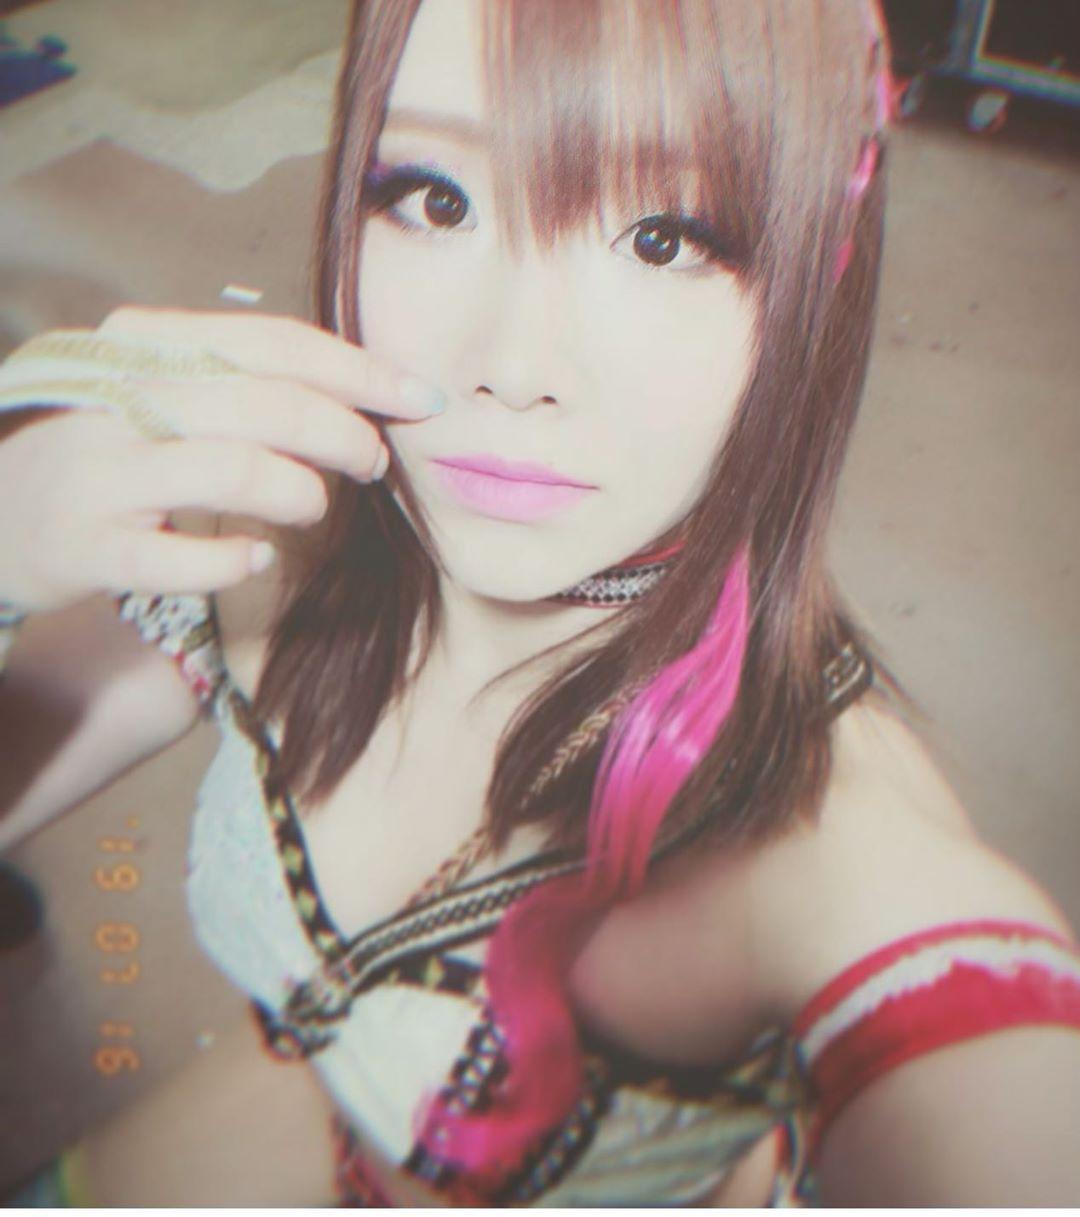 75+ Hot Pictures Of Kairi Sane Which Are Absolutely Mouth-Watering | Best Of Comic Books